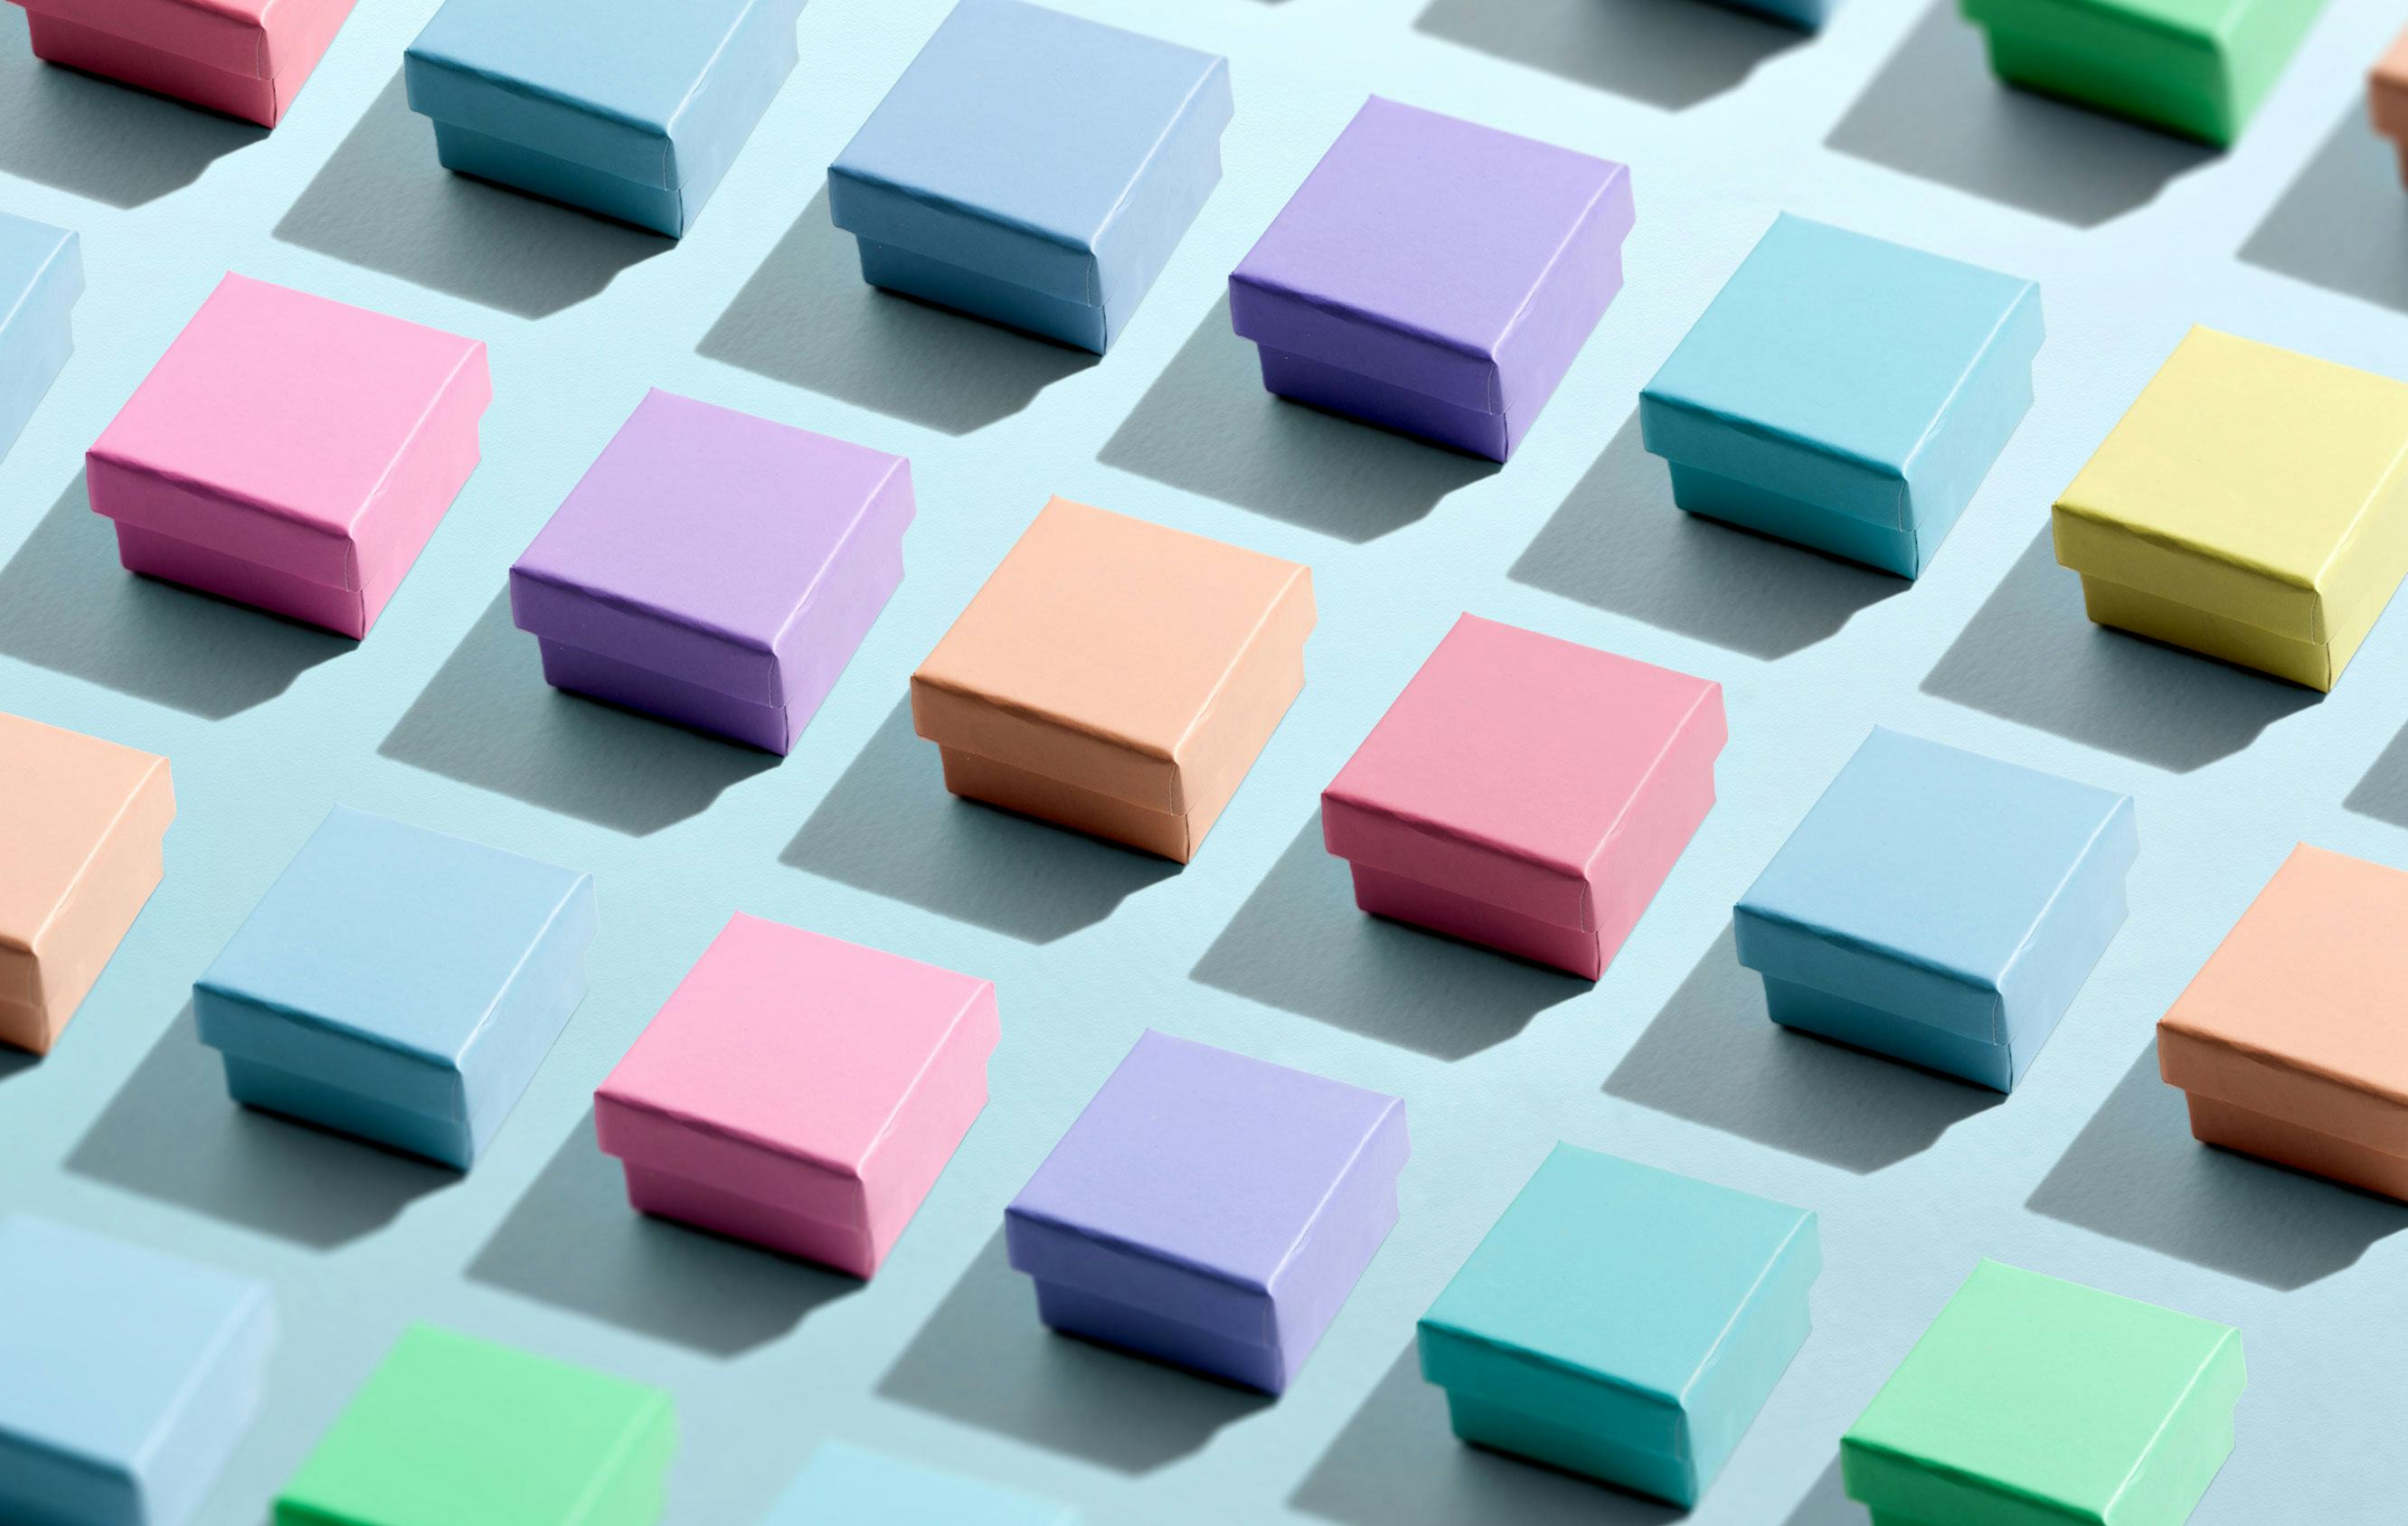 Rows of same-sized, square-shaped boxes in pastel colors